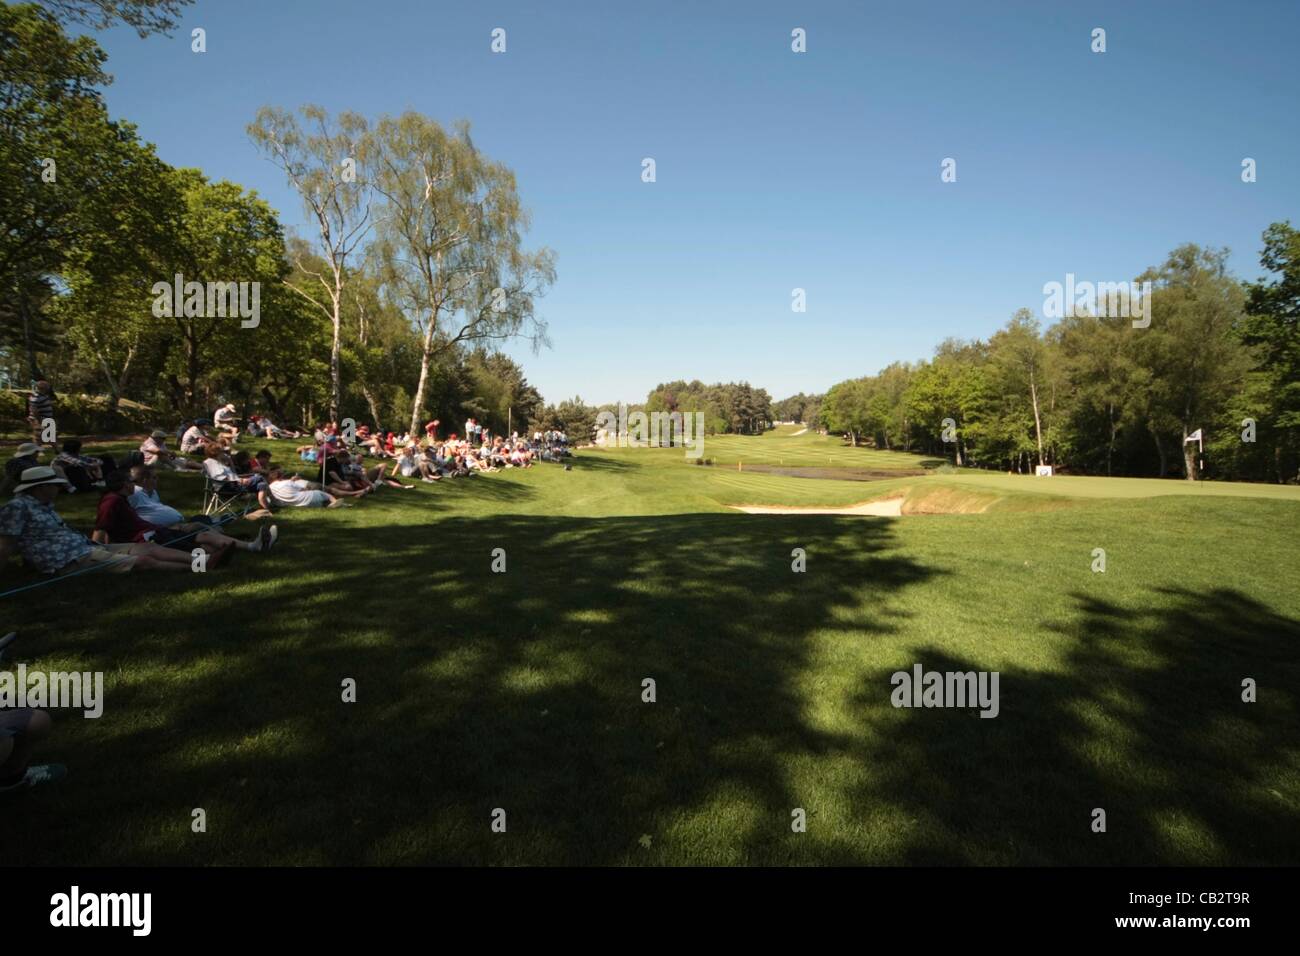 26.05.2012 Wentworth, England. The 8th at the BMW PGA Championship. Saturday, day 3 of competition. Stock Photo